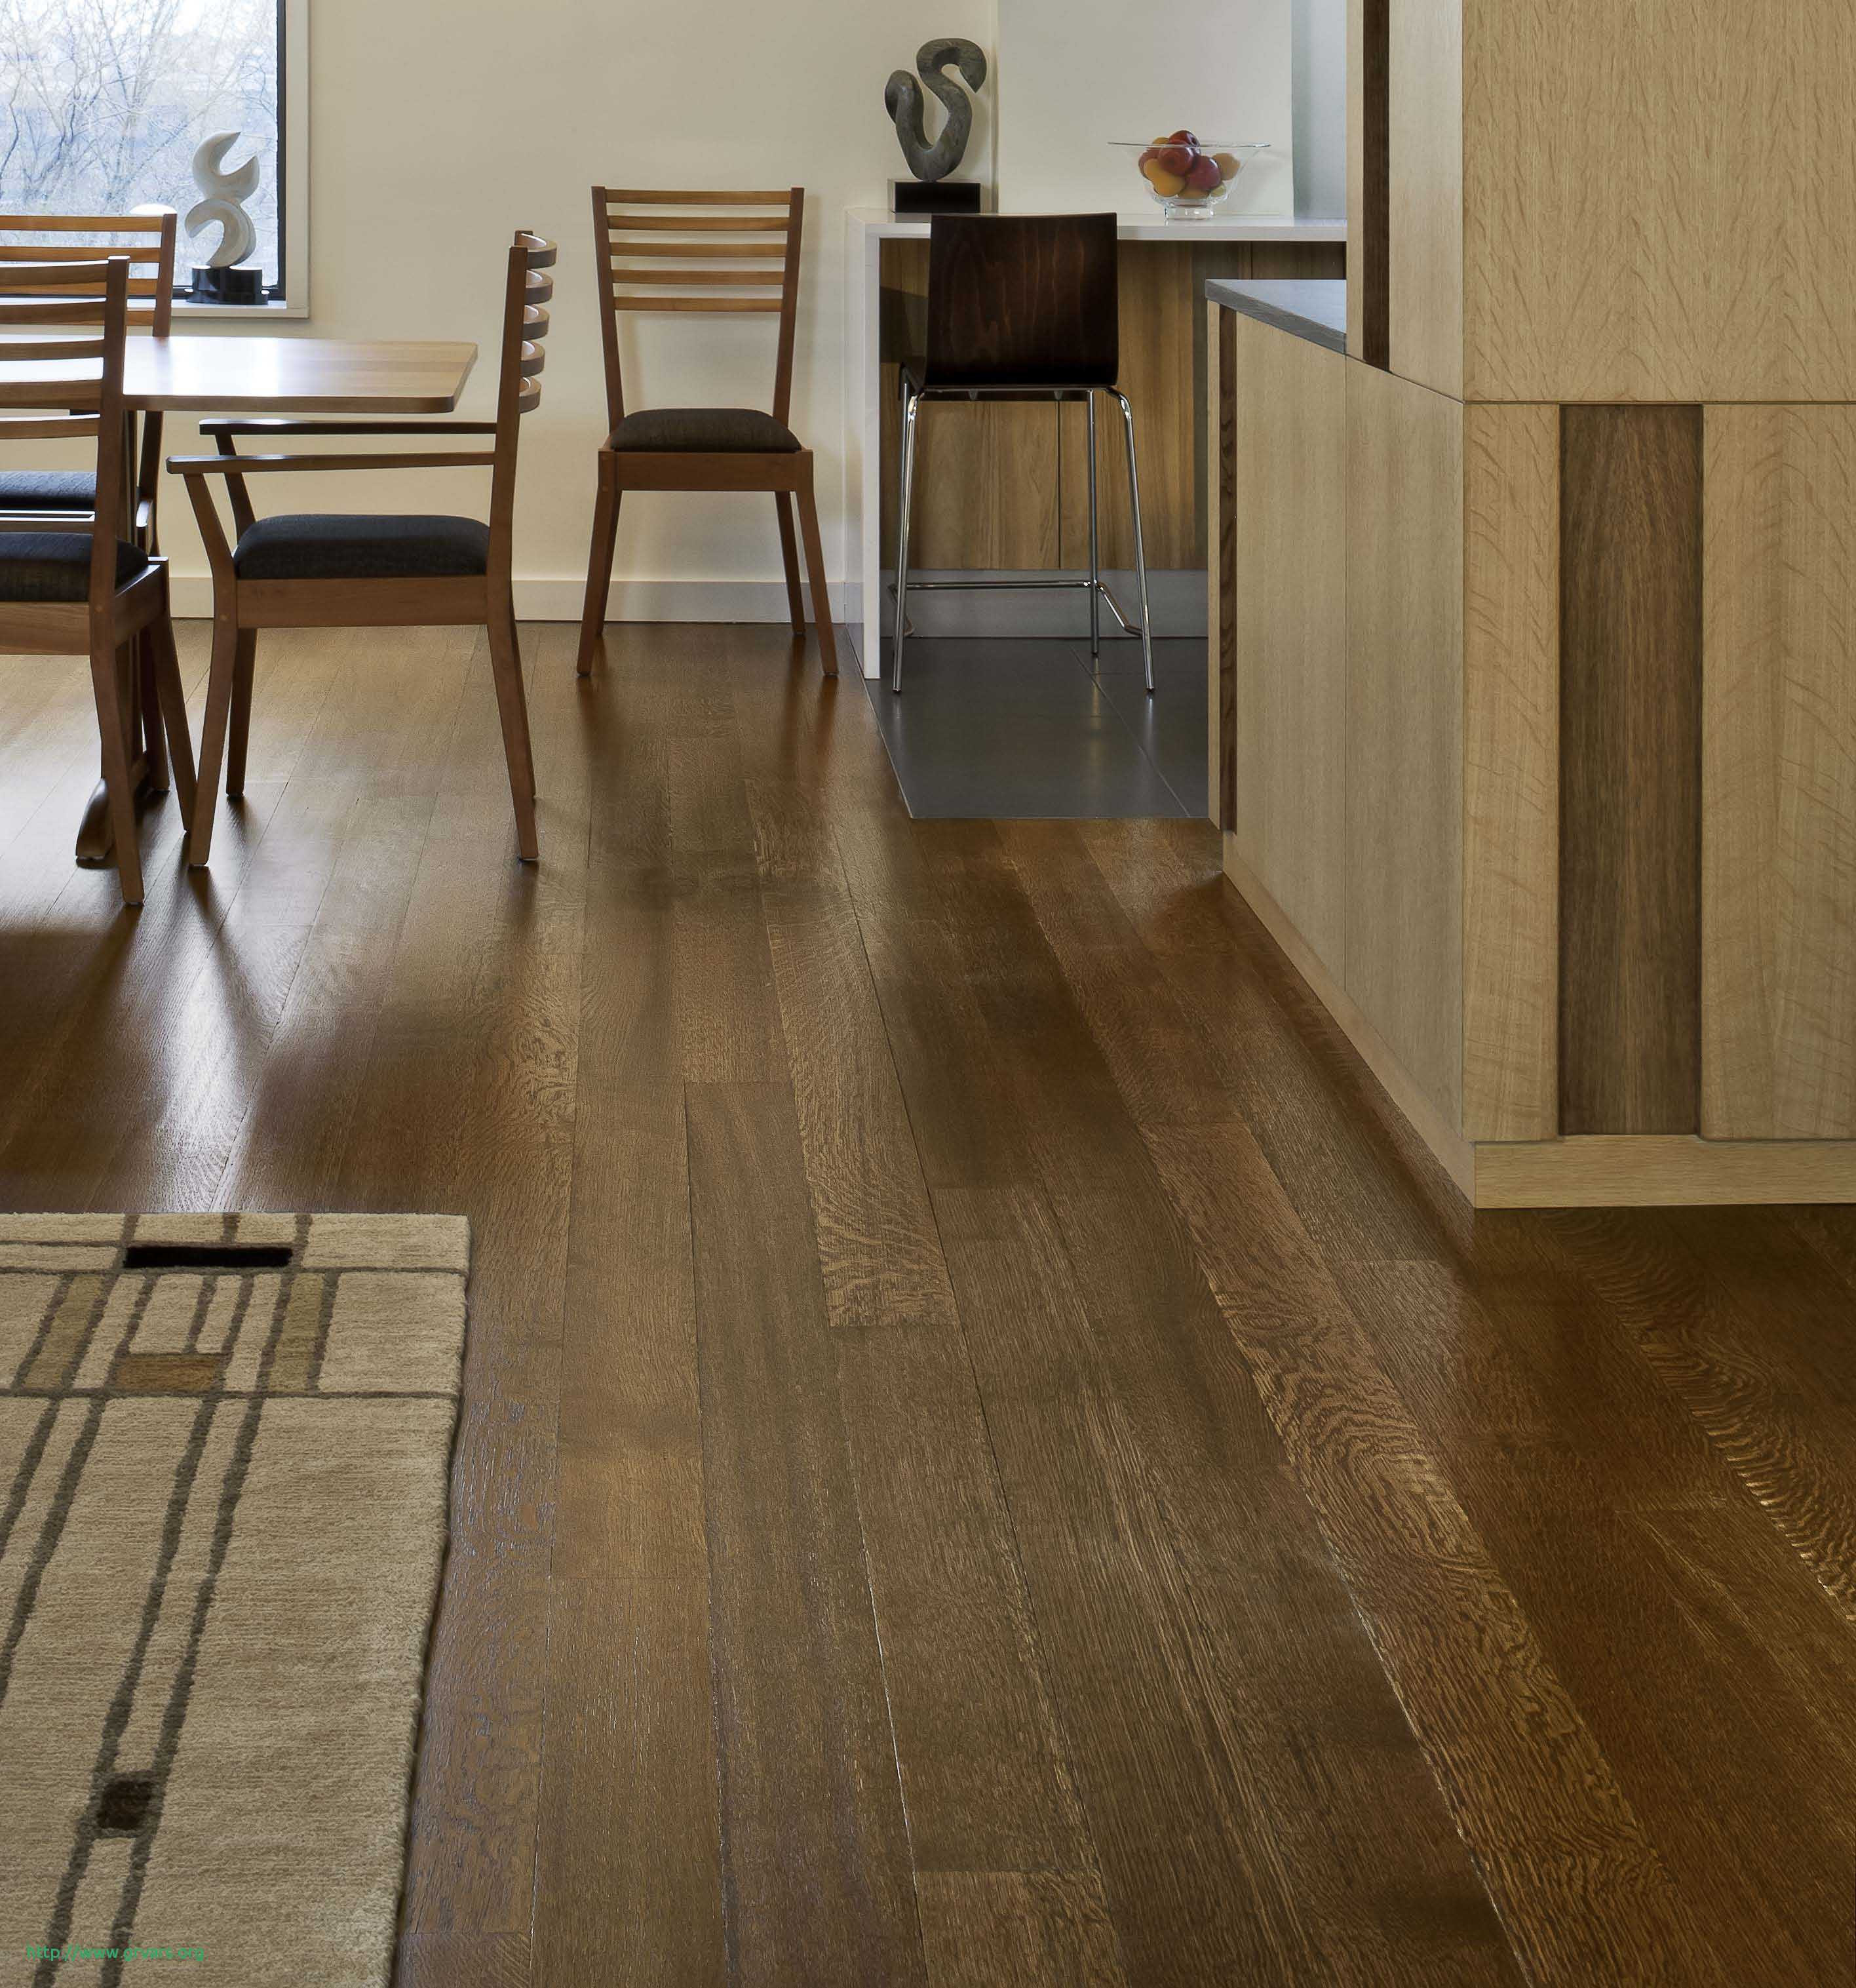 15 Fantastic Installing Laminate Hardwood Flooring 2024 free download installing laminate hardwood flooring of lovely difference between hardwood and laminate flooring bruce throughout lovely difference between hardwood and laminate flooring bruce flooring cus